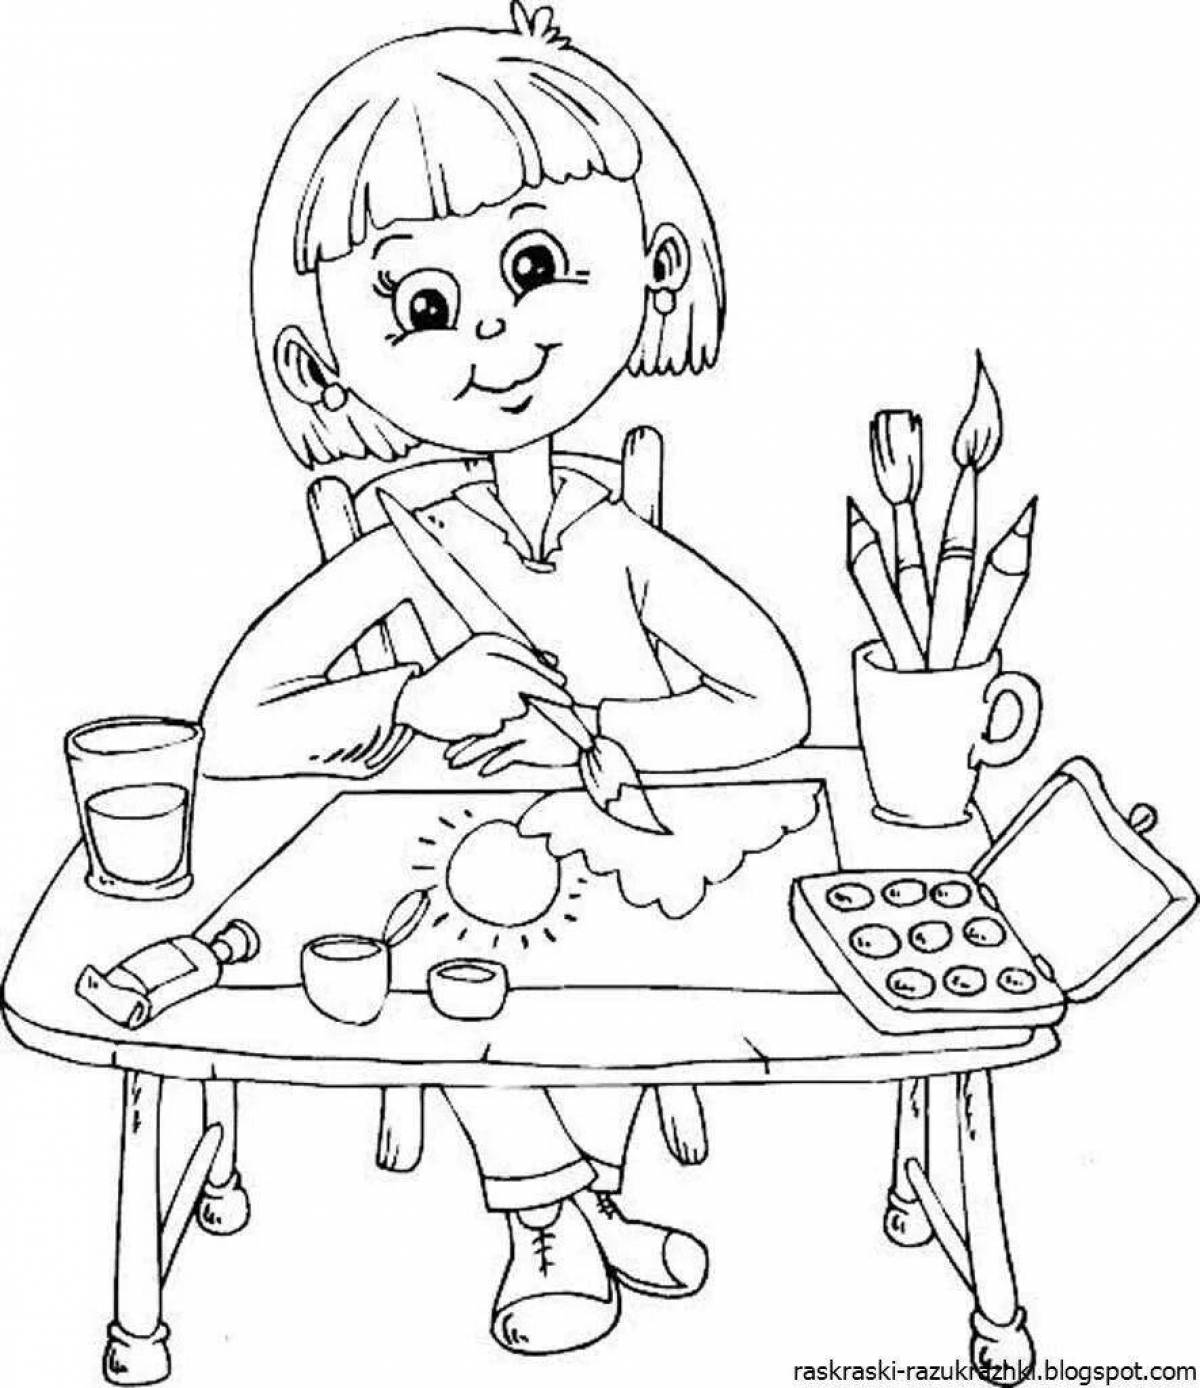 Adorable coloring book I want to draw